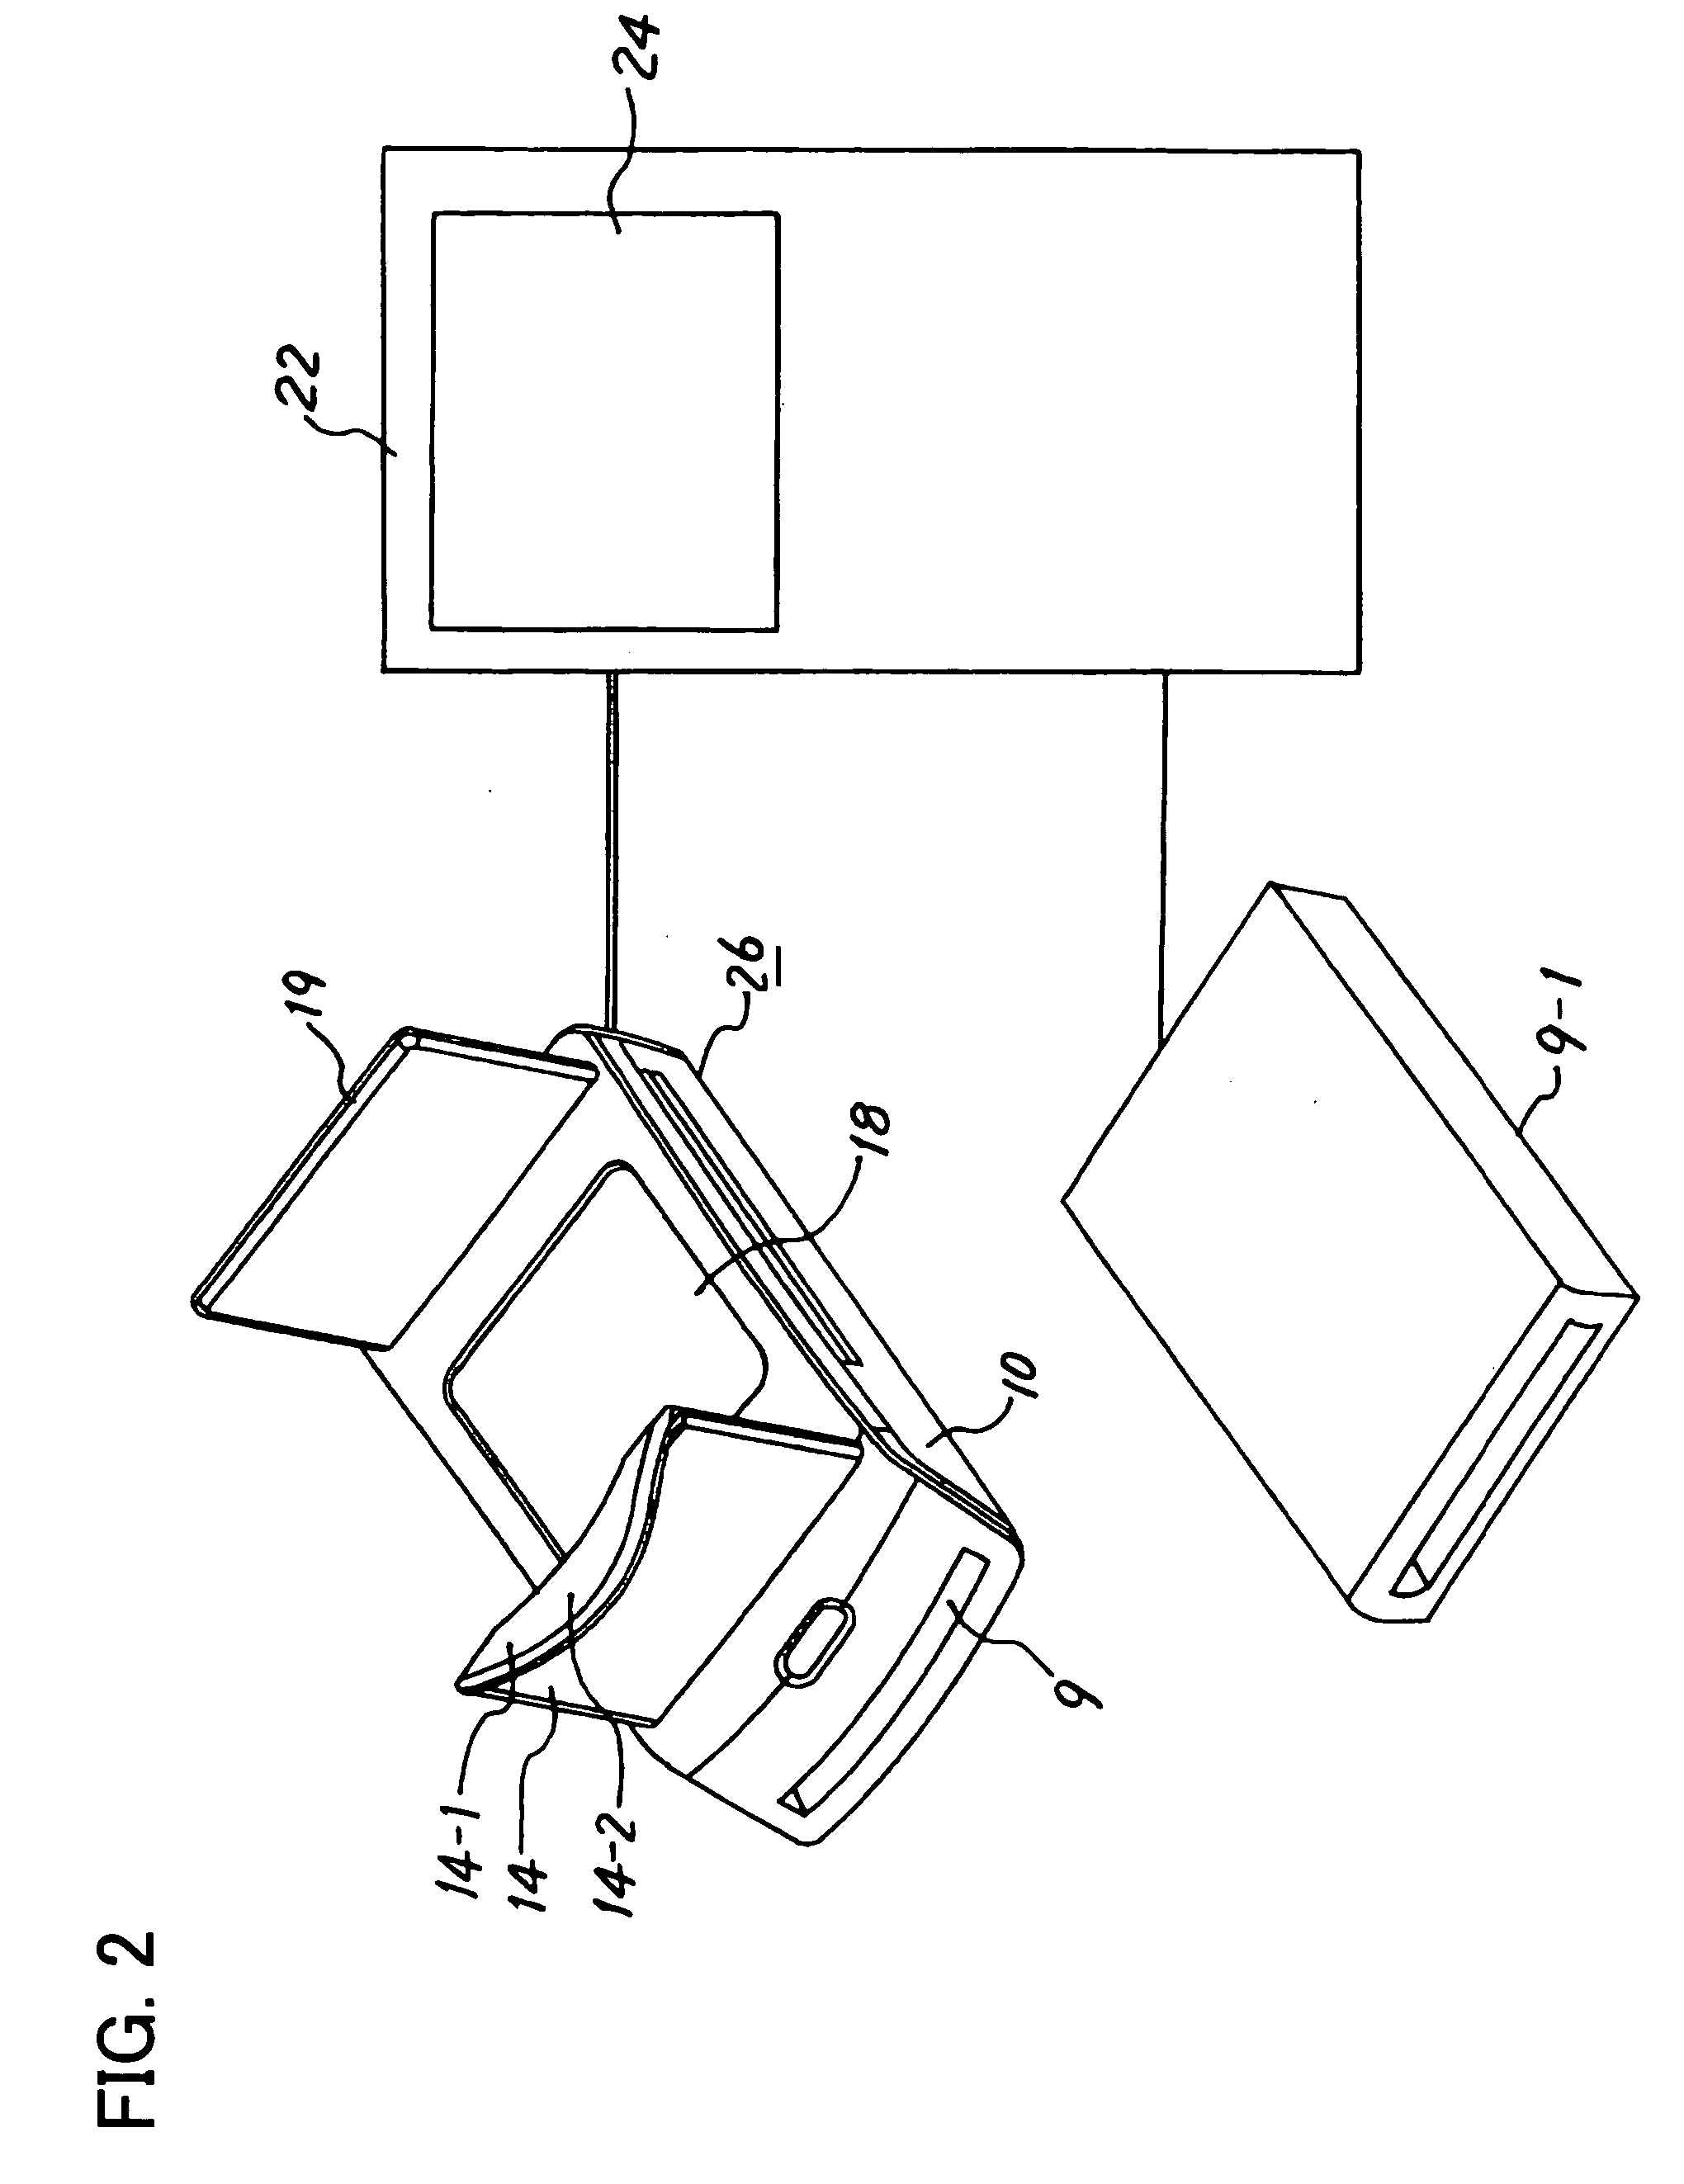 Renewal method and renewal apparatus for an IC card having biometrics authentication functions